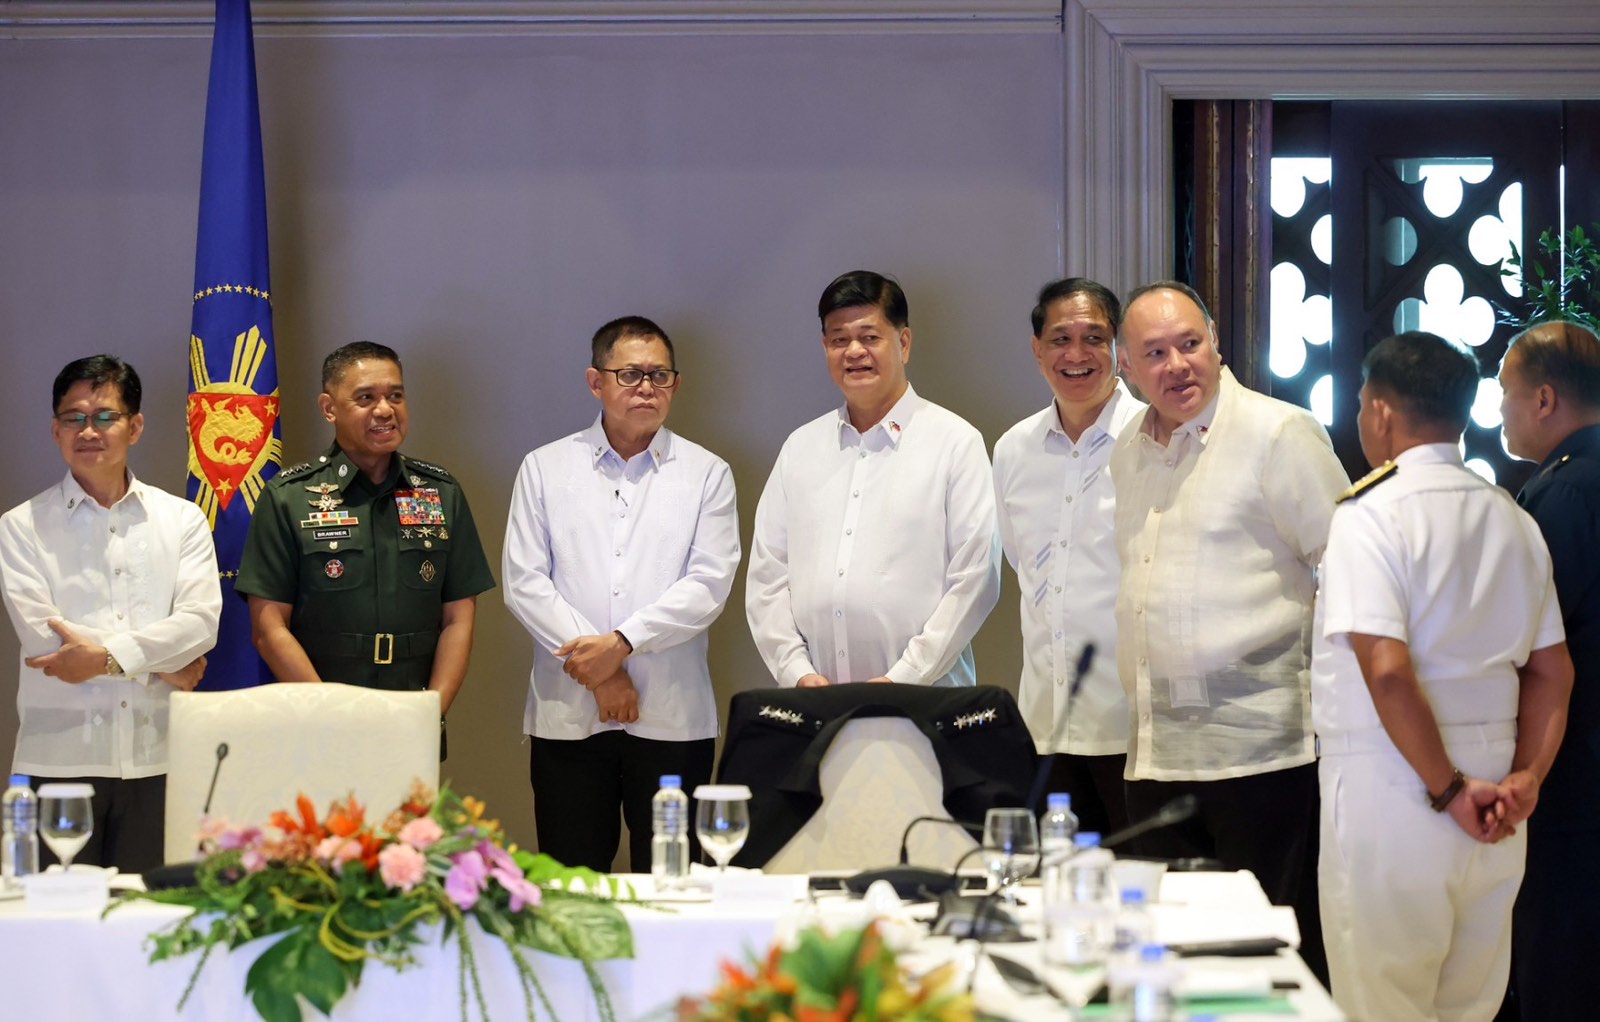 President Ferdinand Marcos Jr. on Tuesday held a command conference with the Philippine Army in Malcacañan Palace.